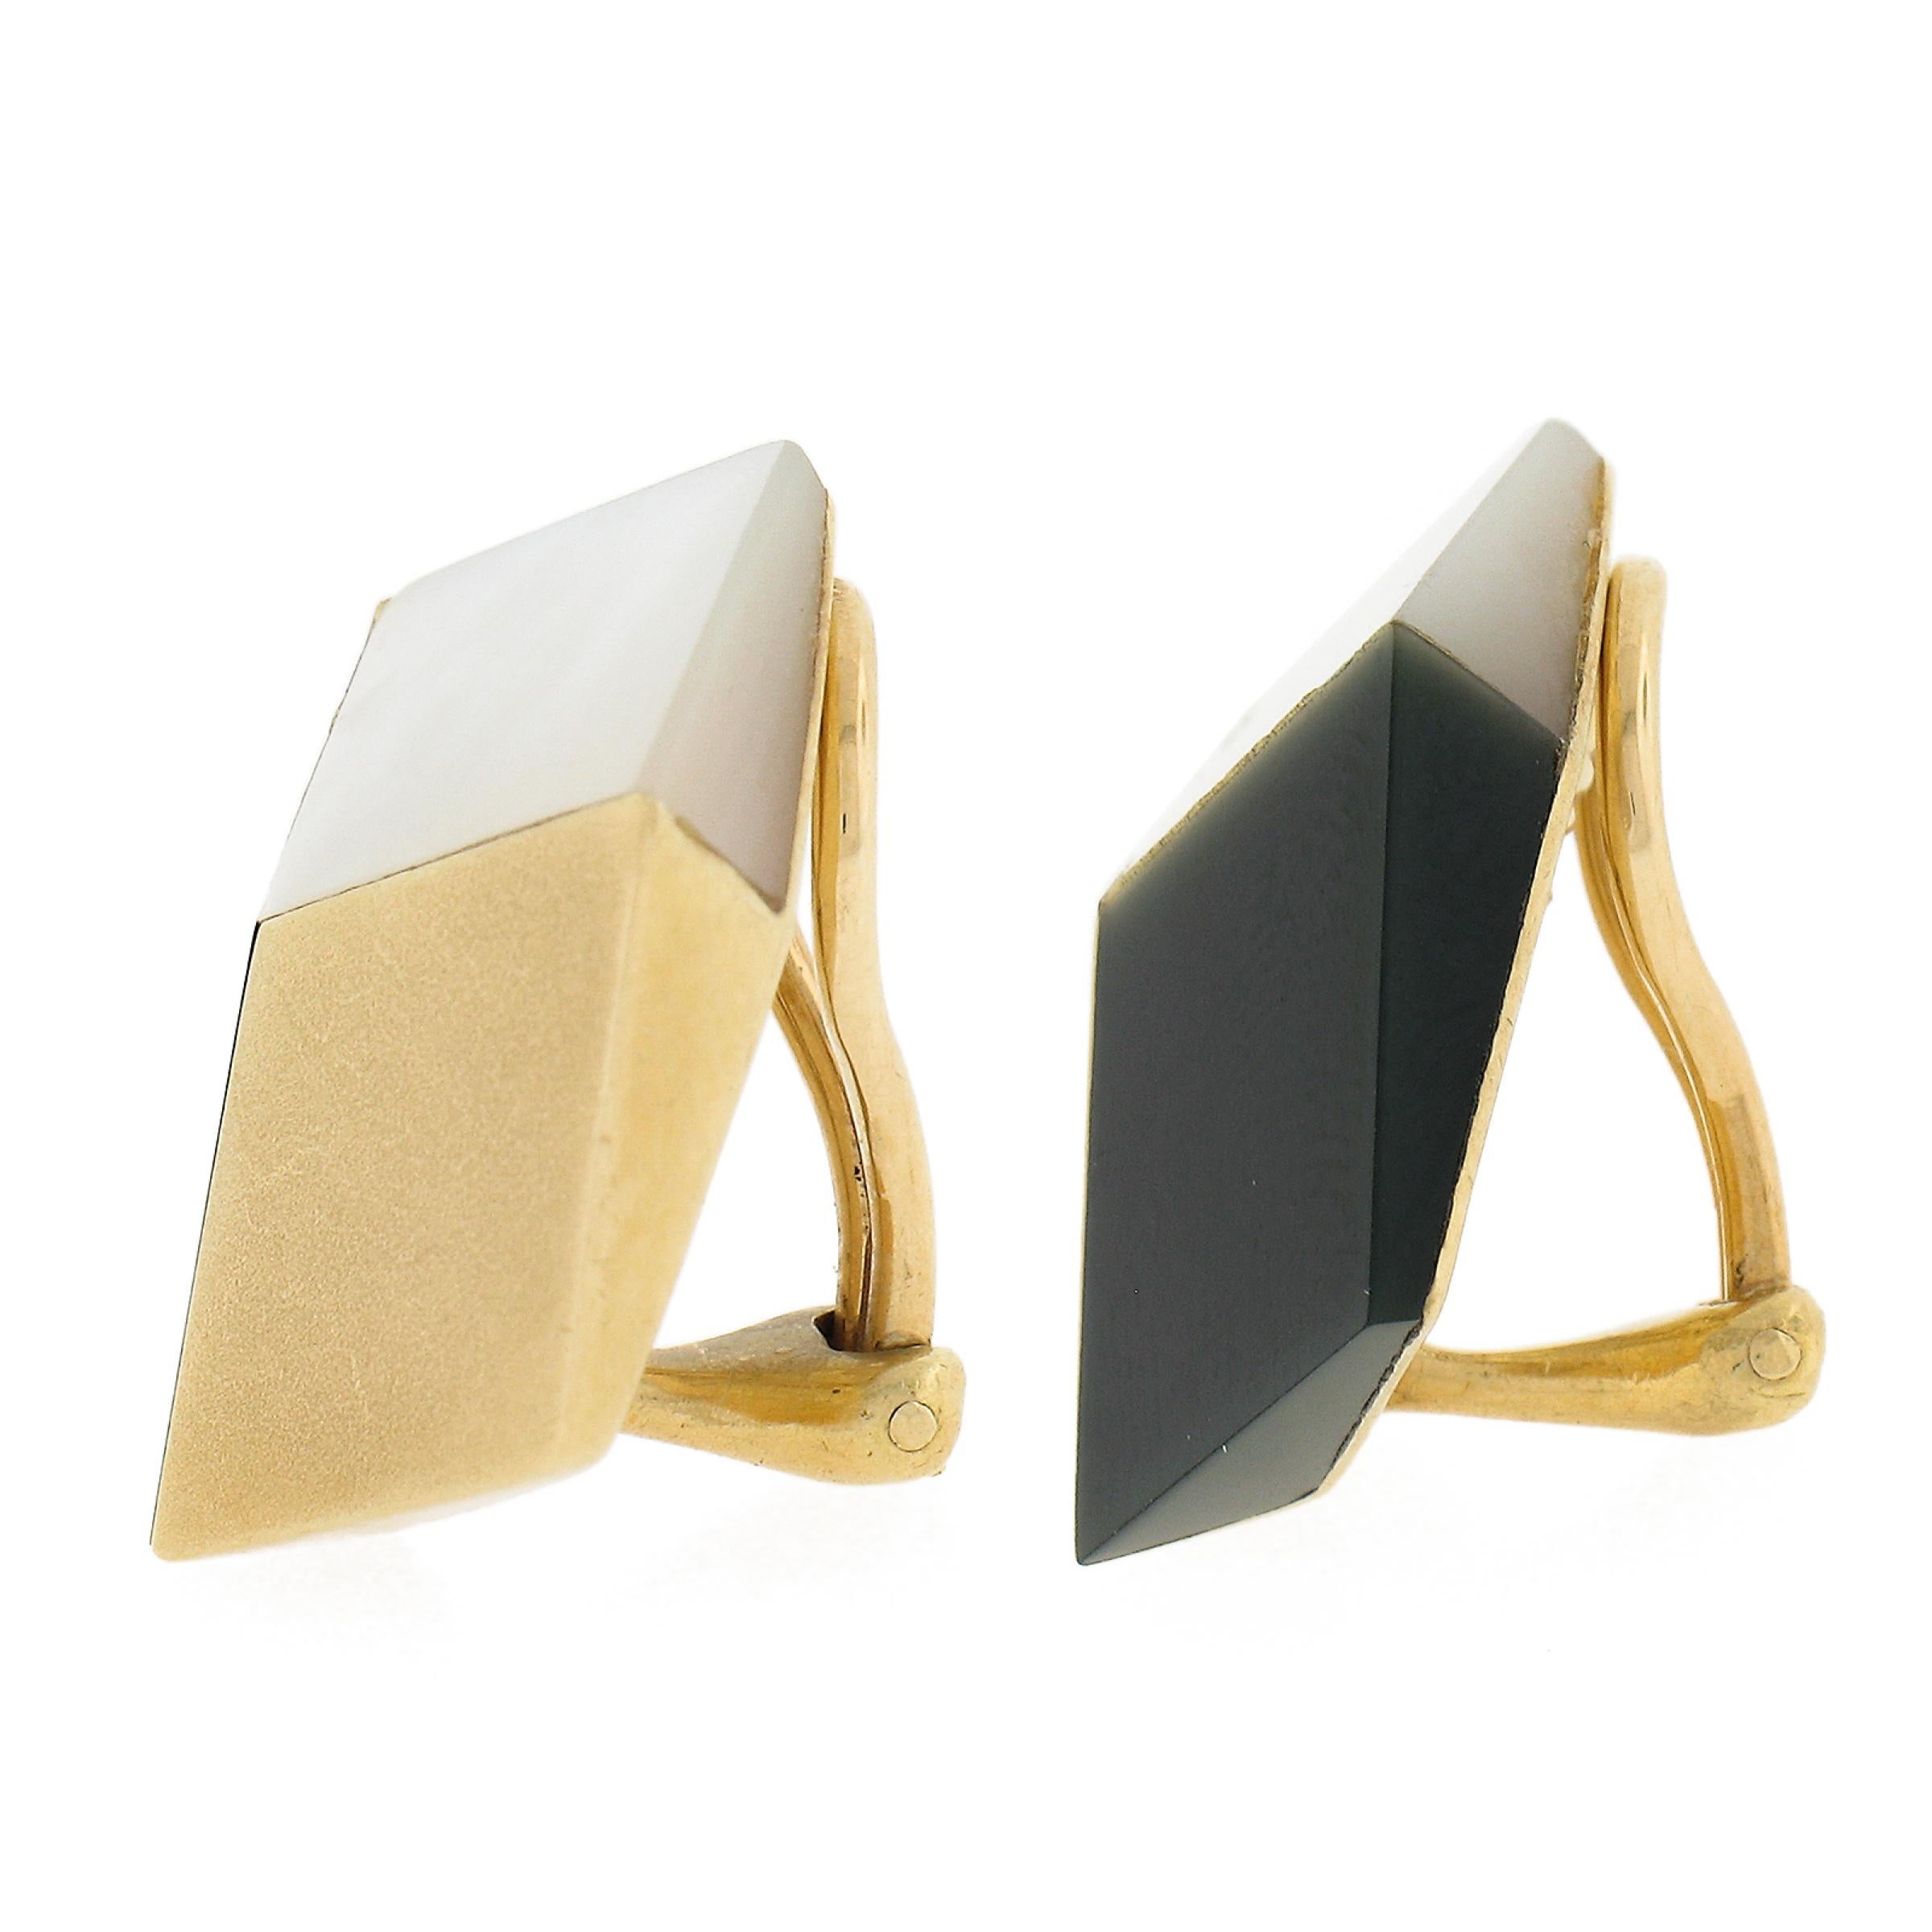 --Stone(s):--
(2) Natural Genuine Black Onyx & (2) Mother of Pearl - Custom Cut - Inlaid Set - Black & White Color

Material: Solid 18k Yellow Gold
Weight: 16.75 Grams
Backing: Clip On Closures (Pierced ears are NOT required)
Height: 24.4mm (0.96